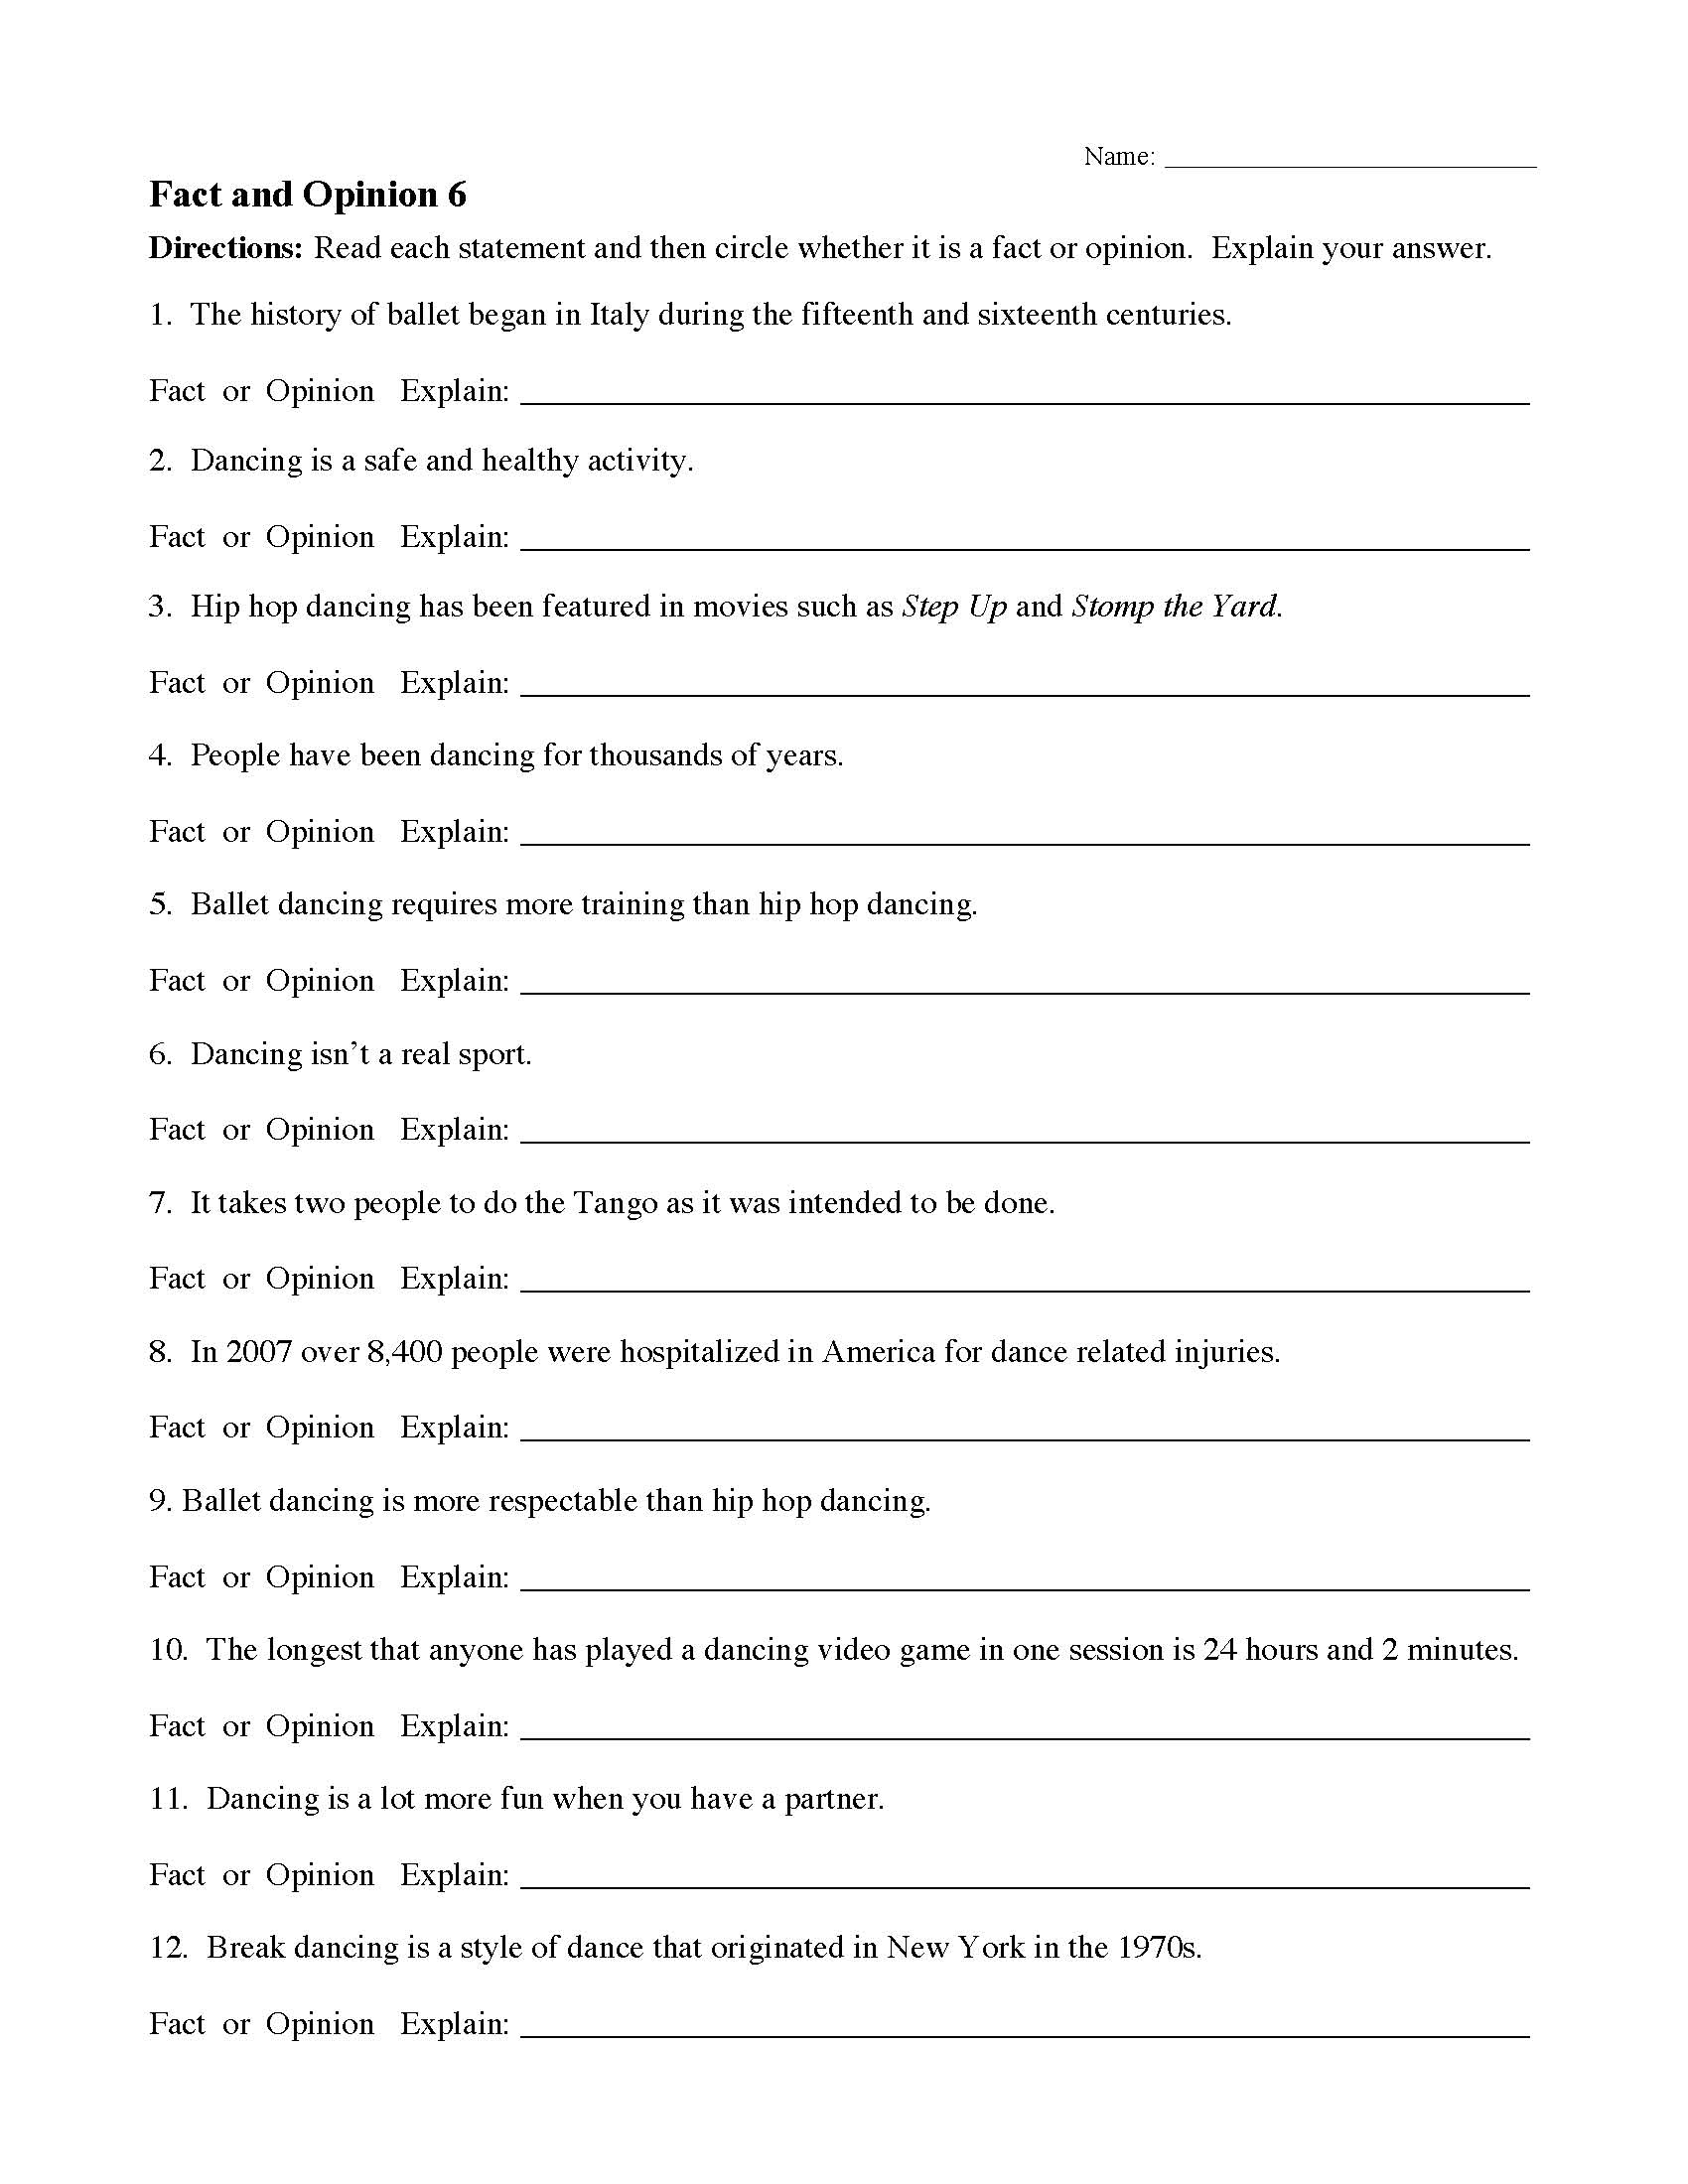 fact-and-opinion-worksheets-reading-comprehension